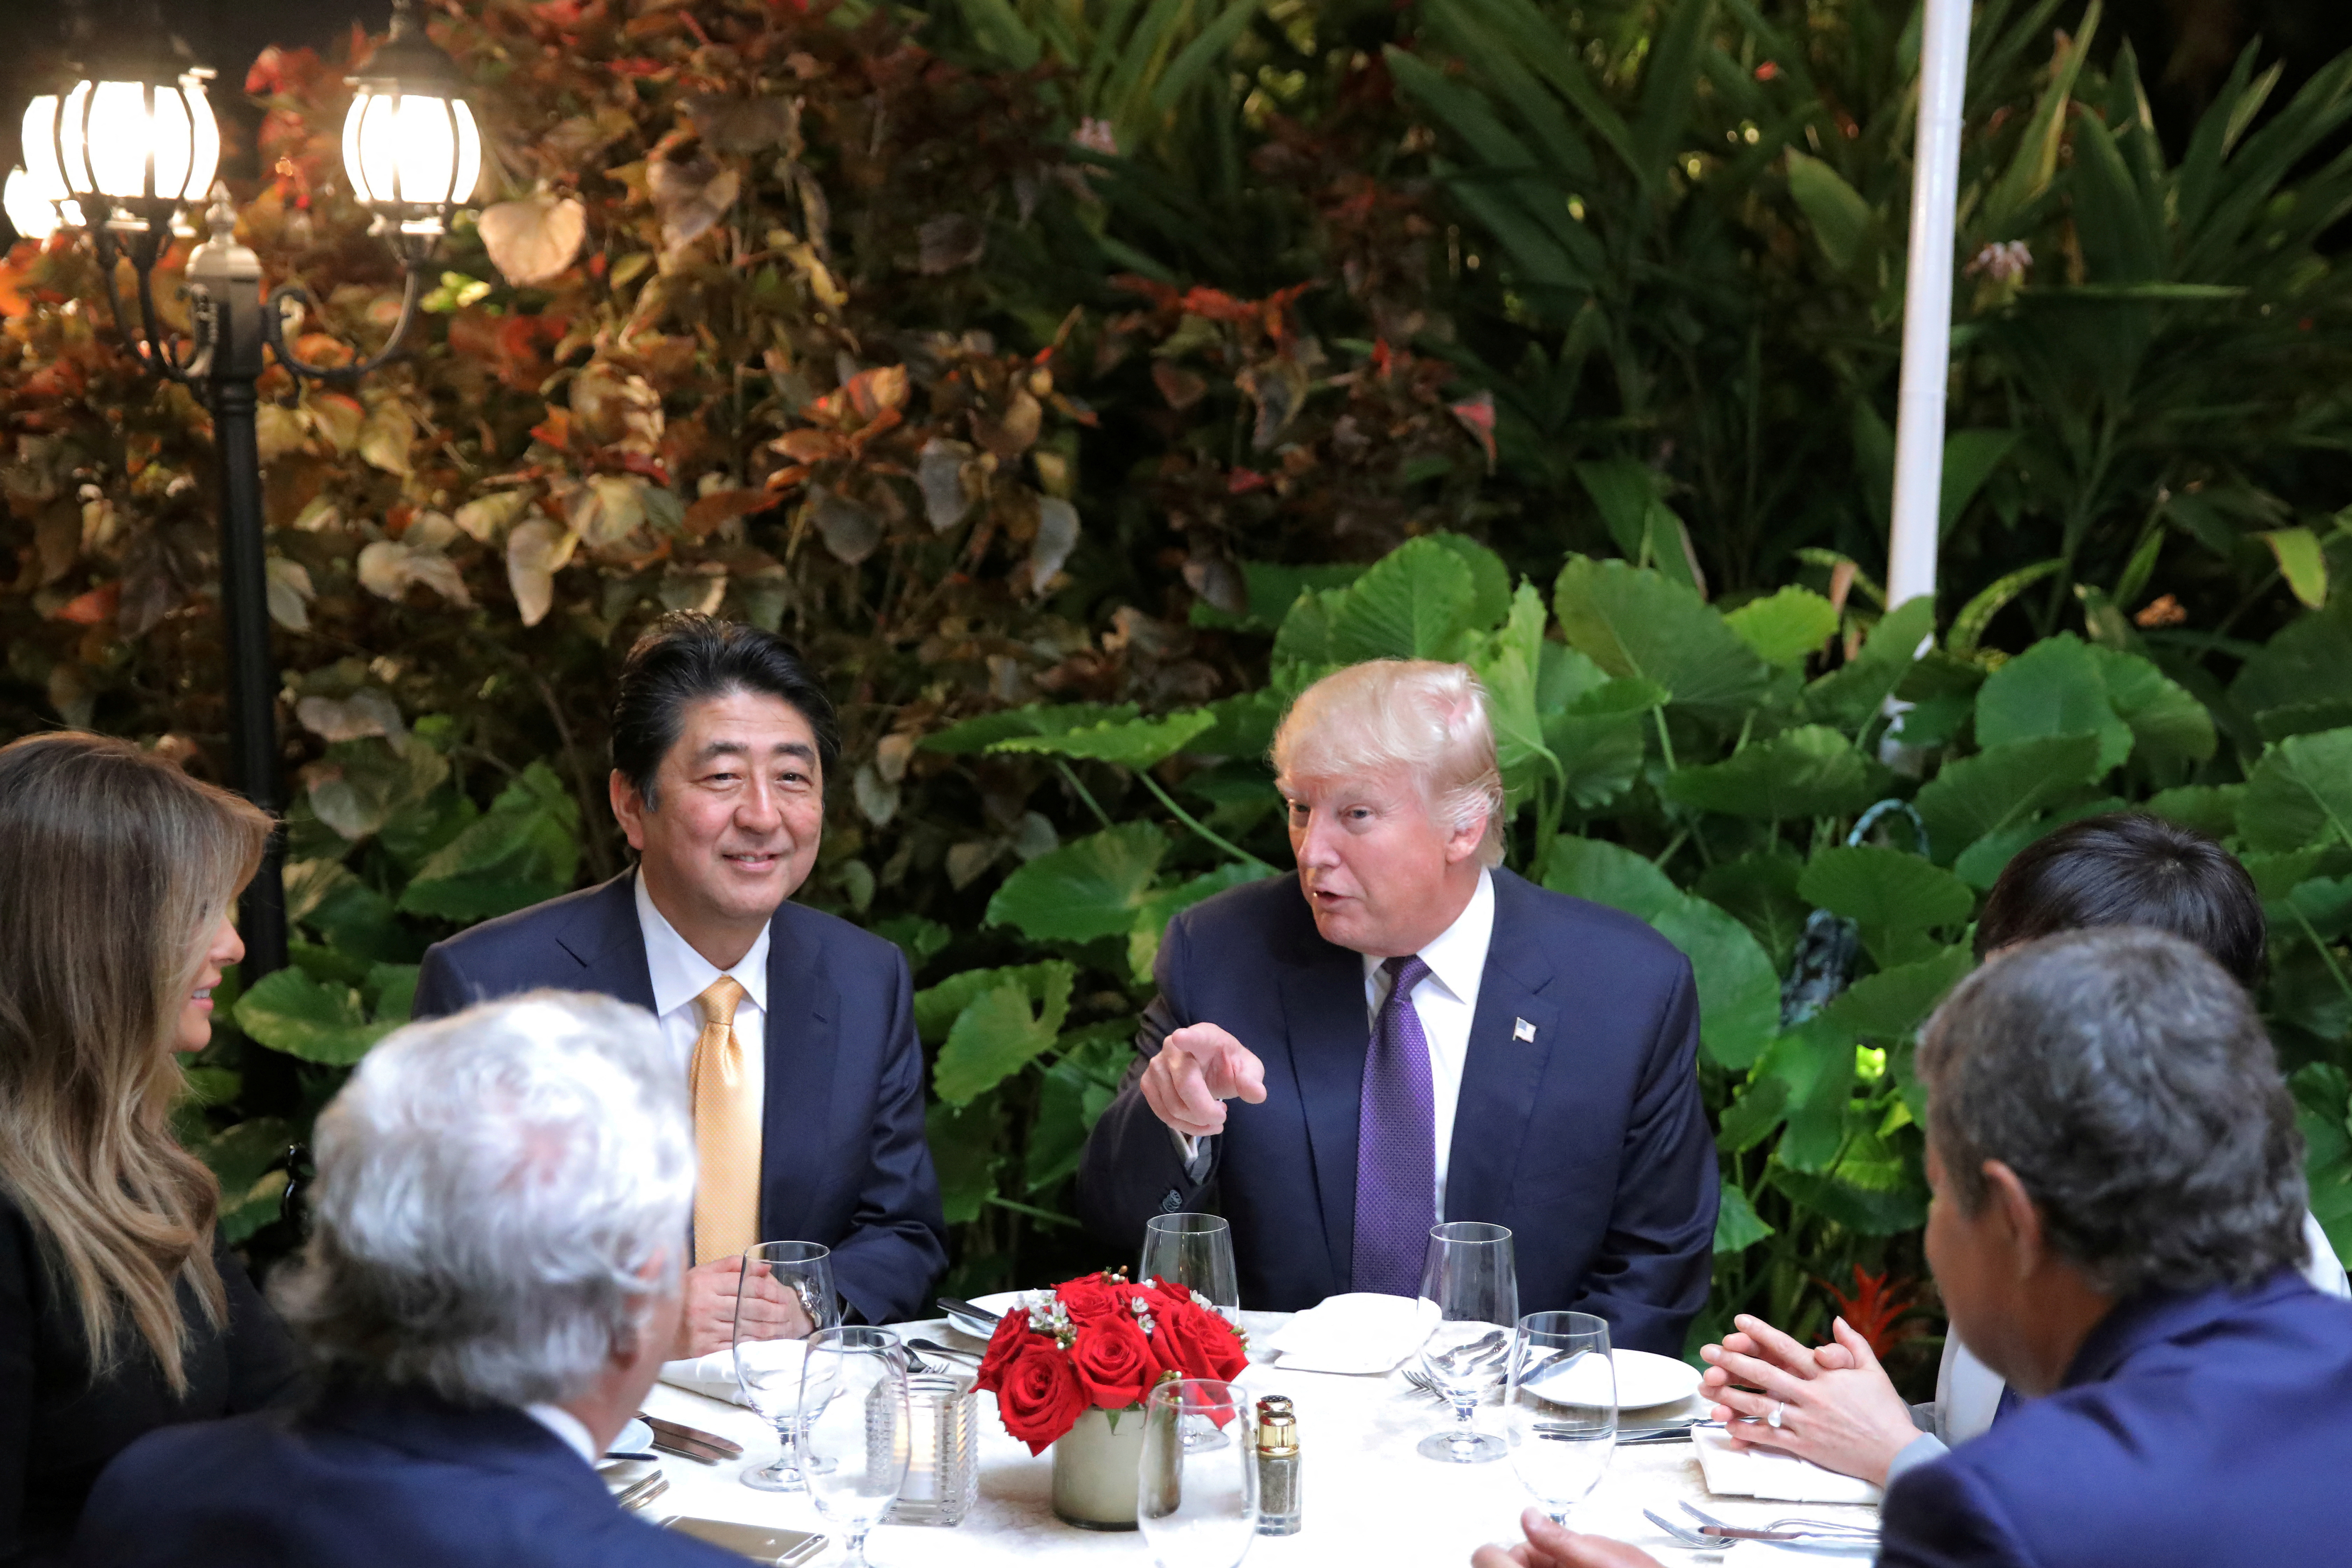 Japanese Prime Minister Shinzo Abe and Akie Abe attend dinner with U.S. President Donald Trump his wife Melania, and Robert Kraft at Mar-a-Lago Club in Palm Beach